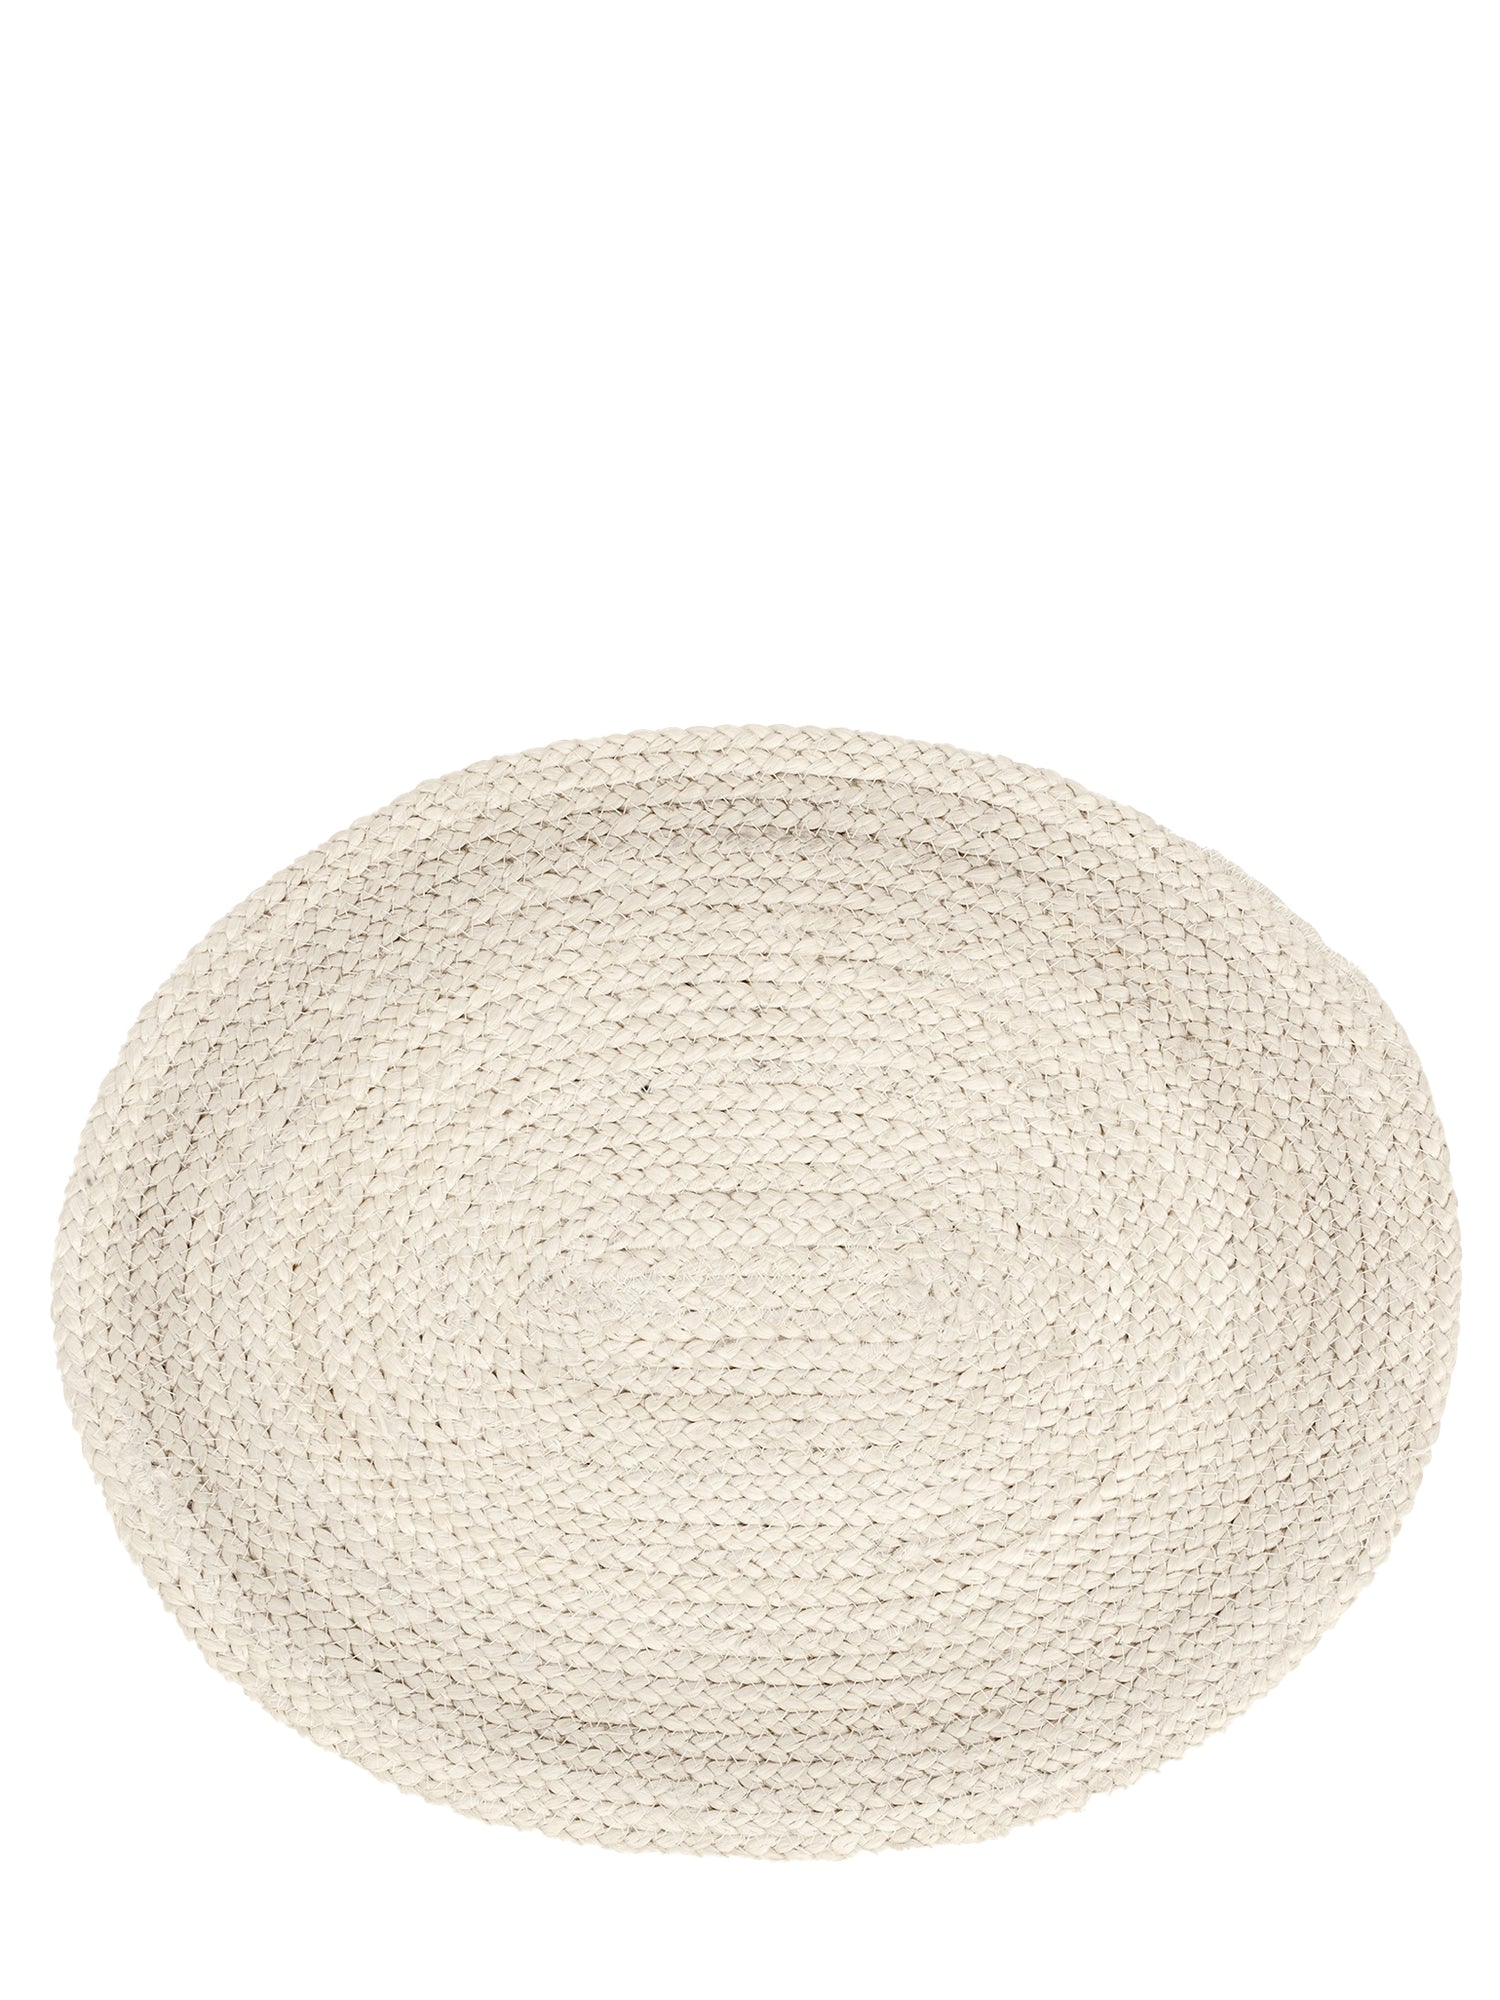 Oval braided placemat Elin, white